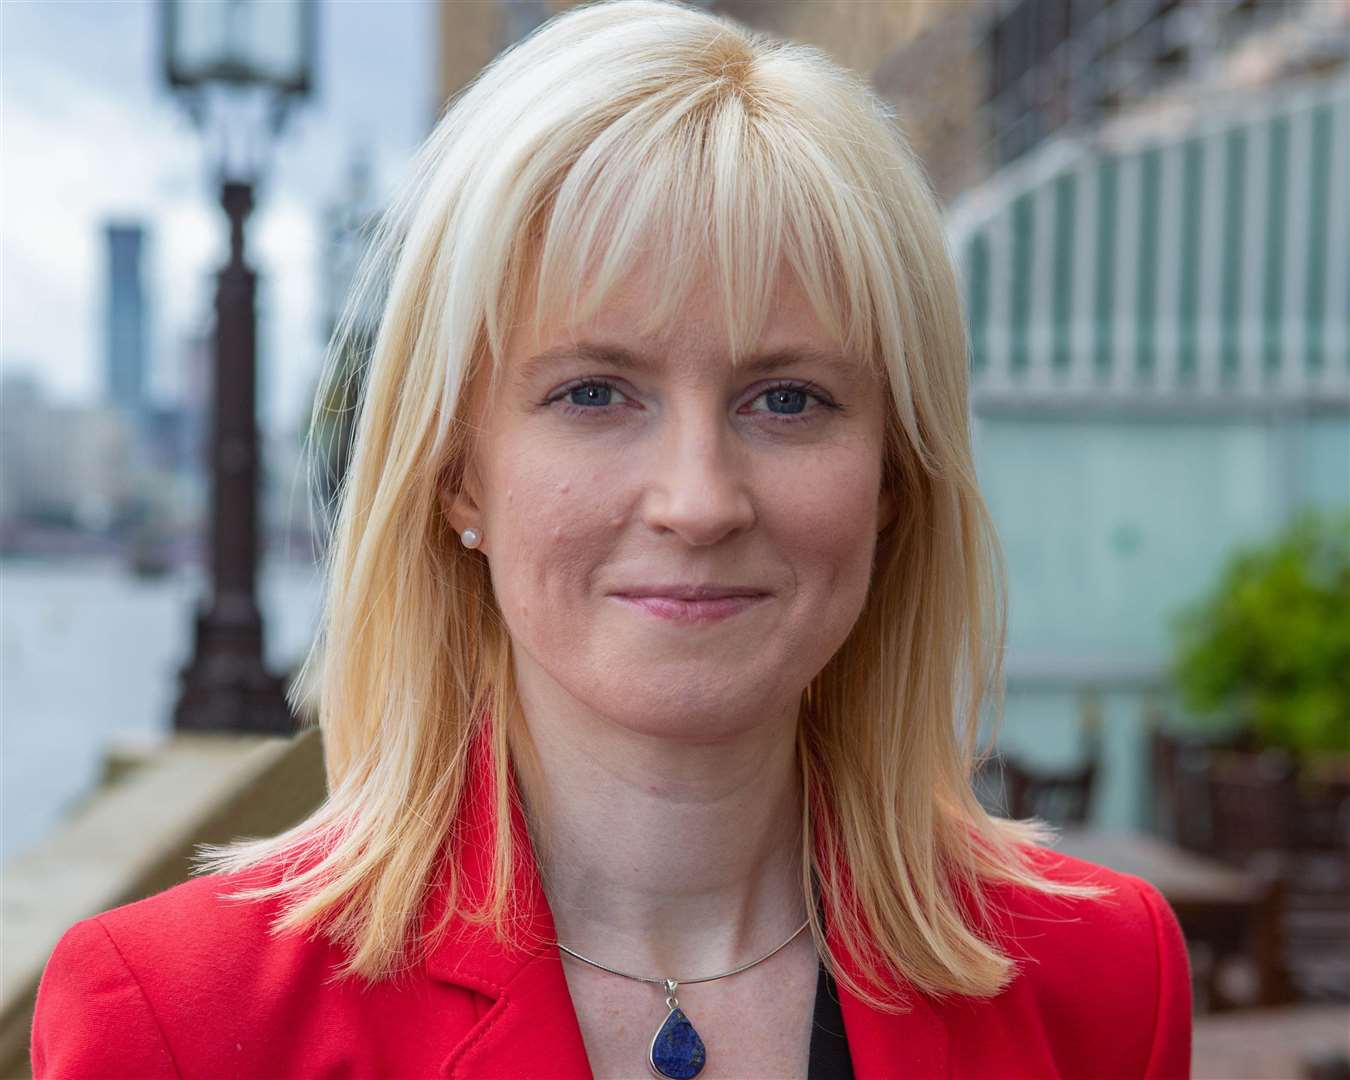 Labour MP Rosie Duffield says NHS staff are being pushed to their limit